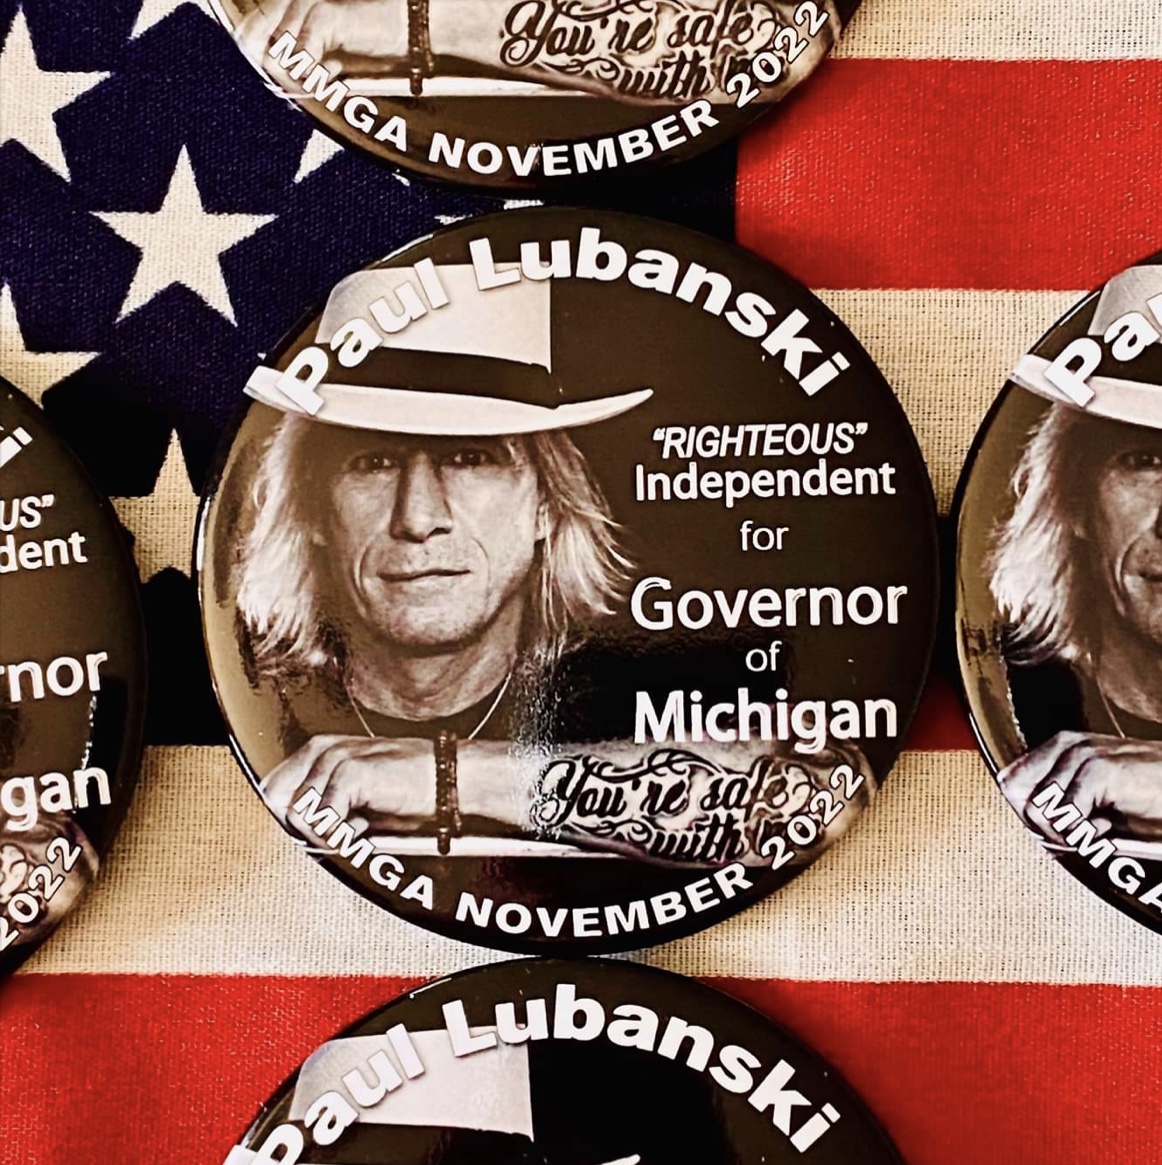 Lauded Michigan Songwriter Paul Lubanski Announces Candidacy for Michigan Governorship in November 2022